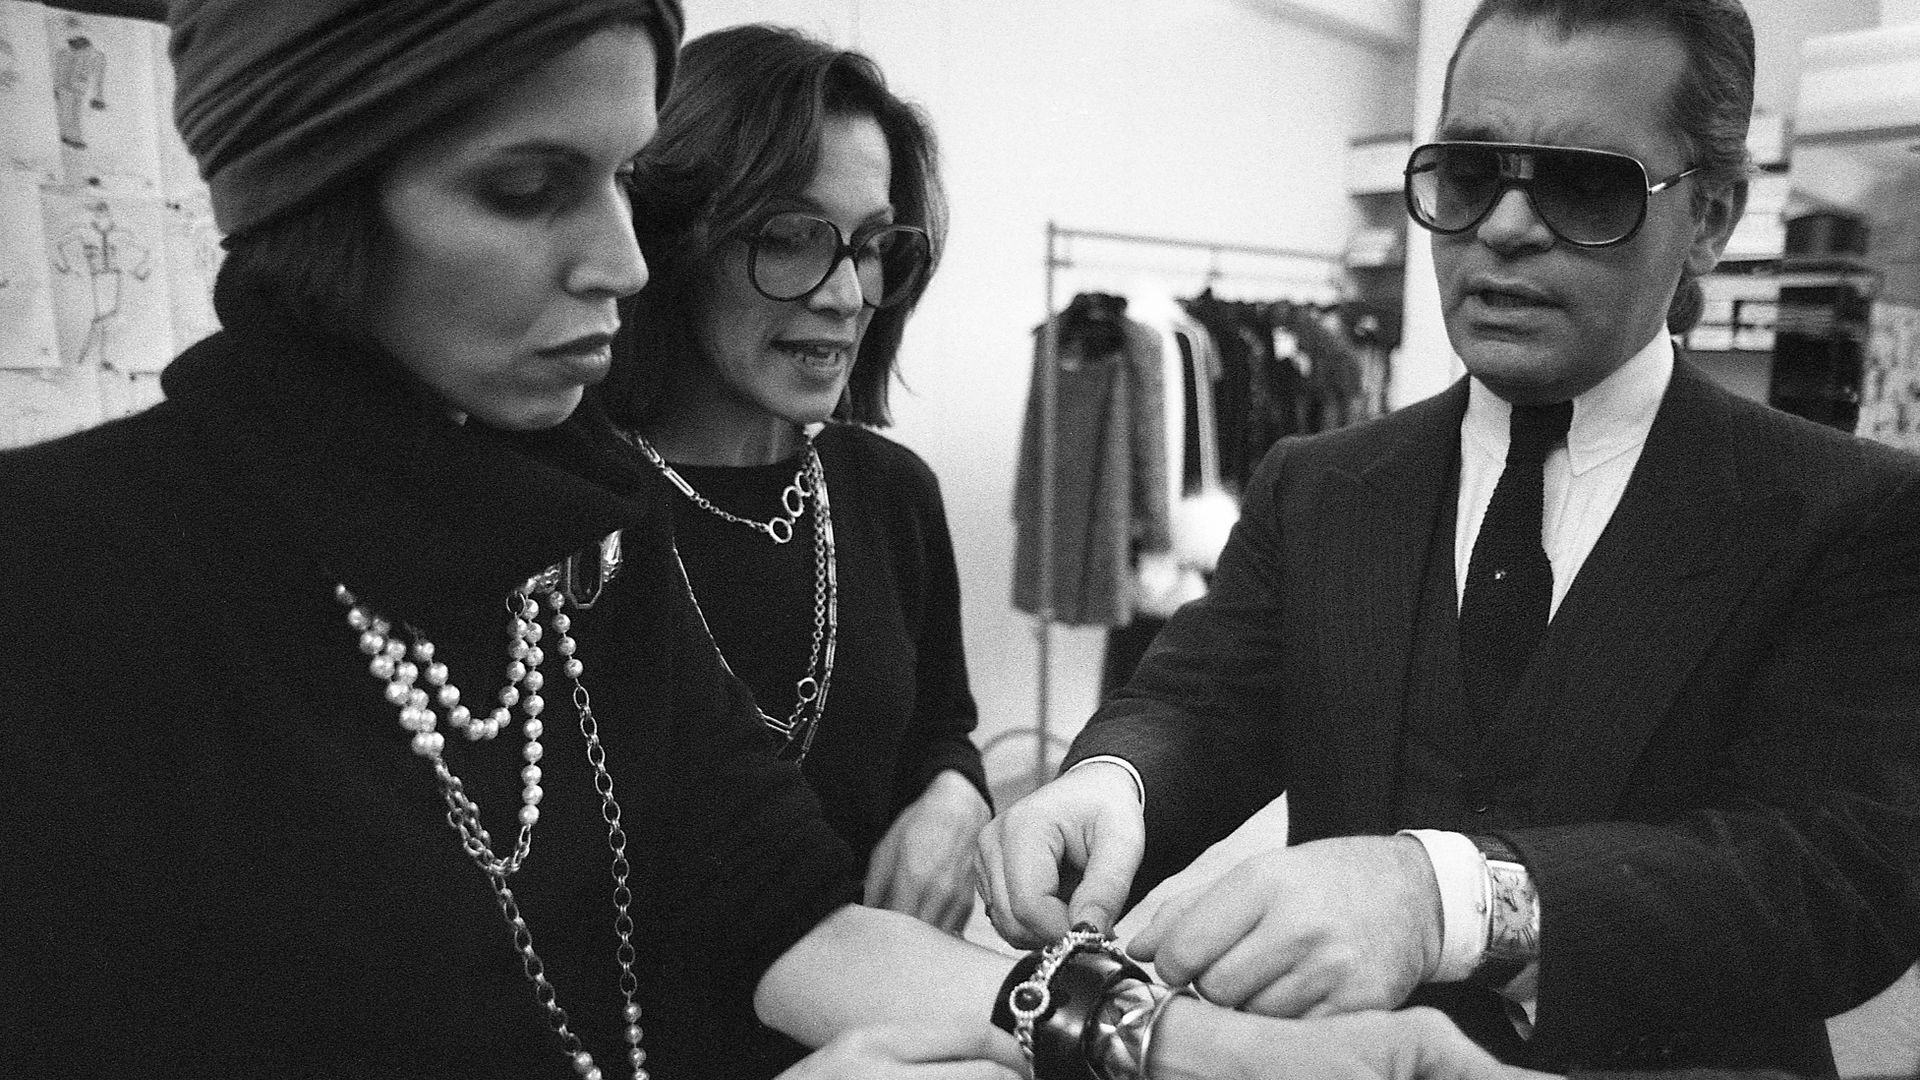 Karl Lagerfeld through the years: Designer's life, career in photos